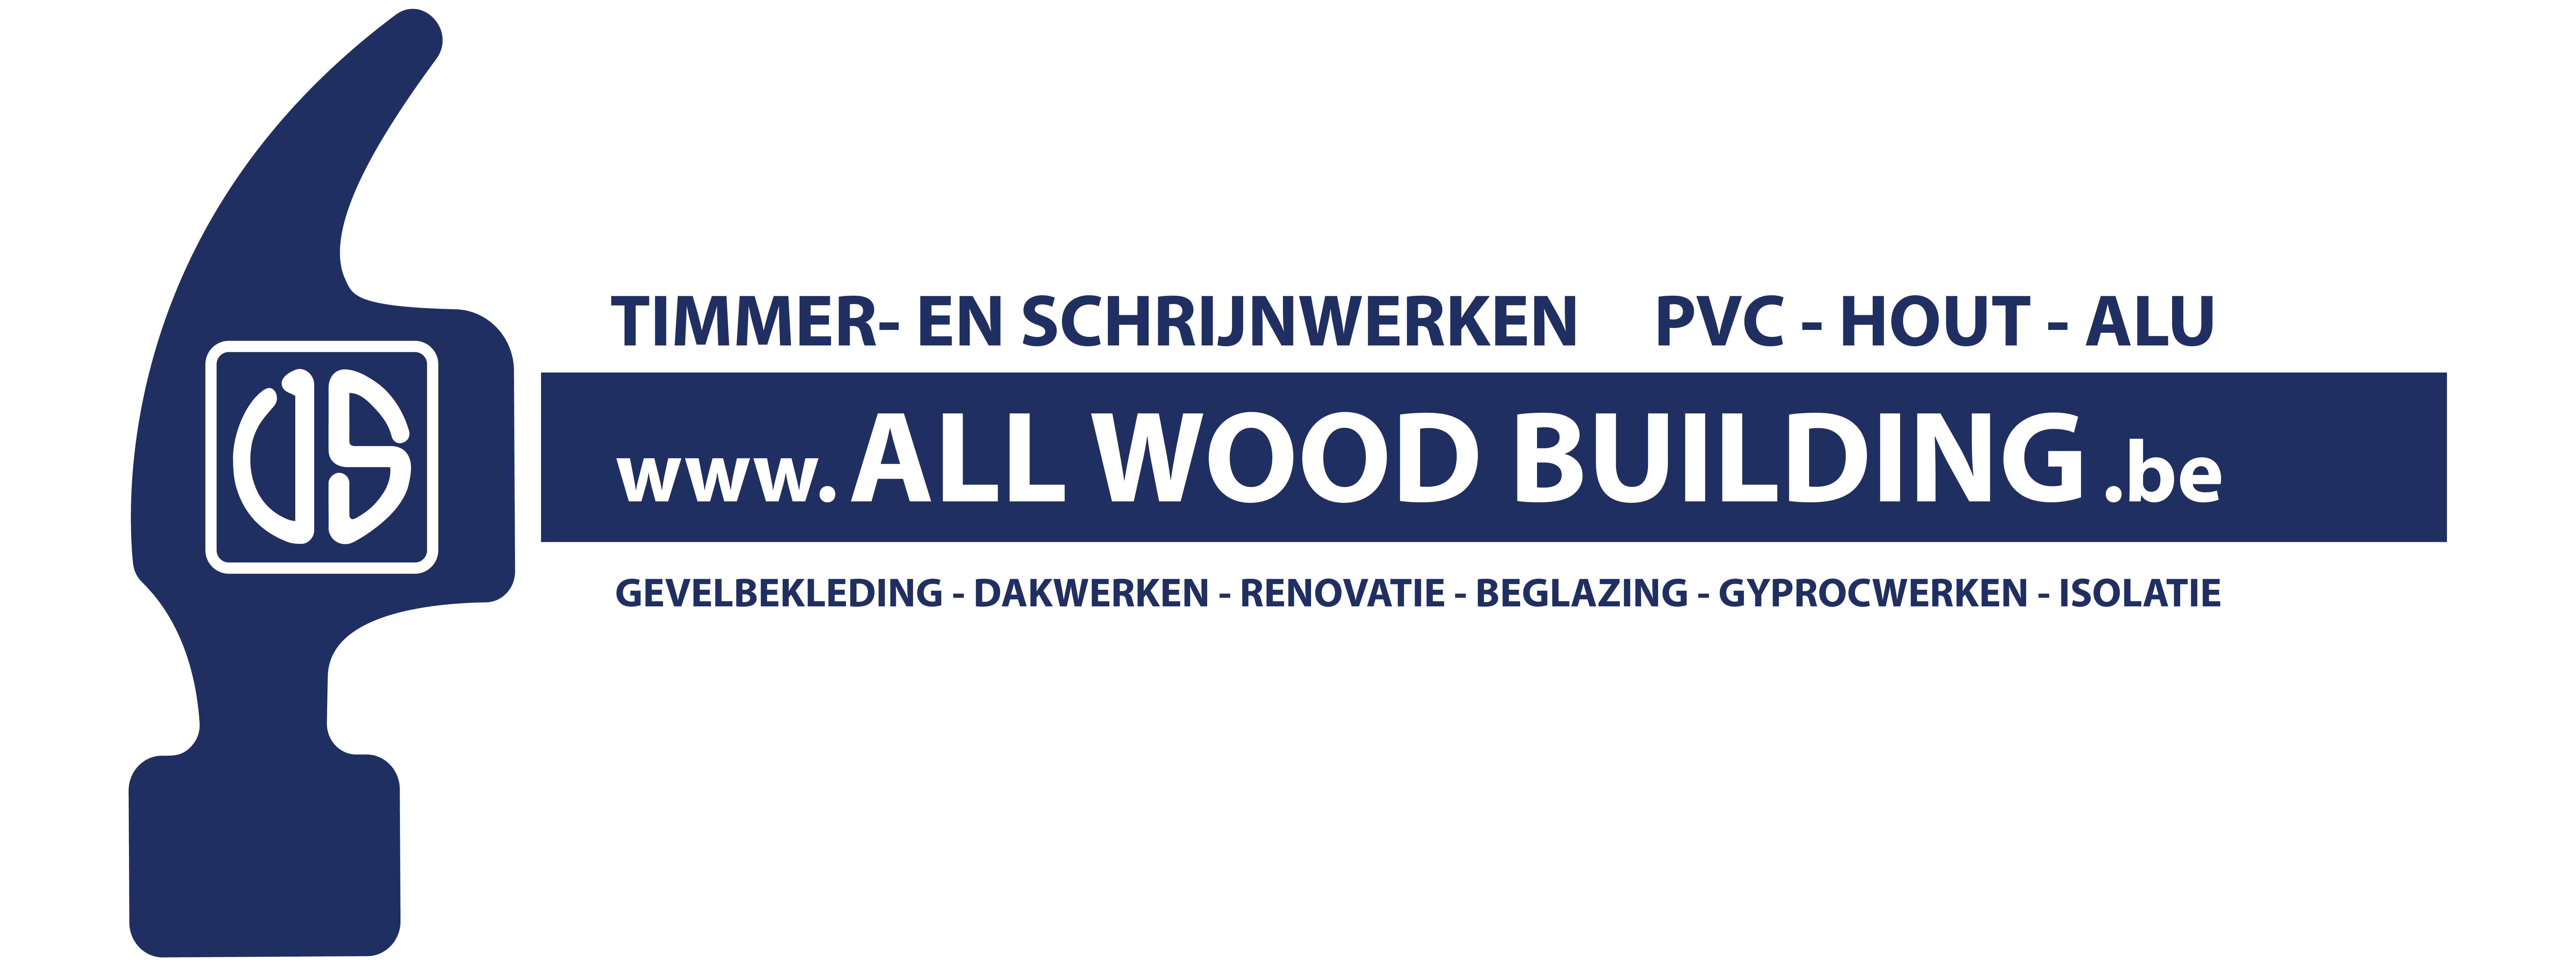 All Wood Building